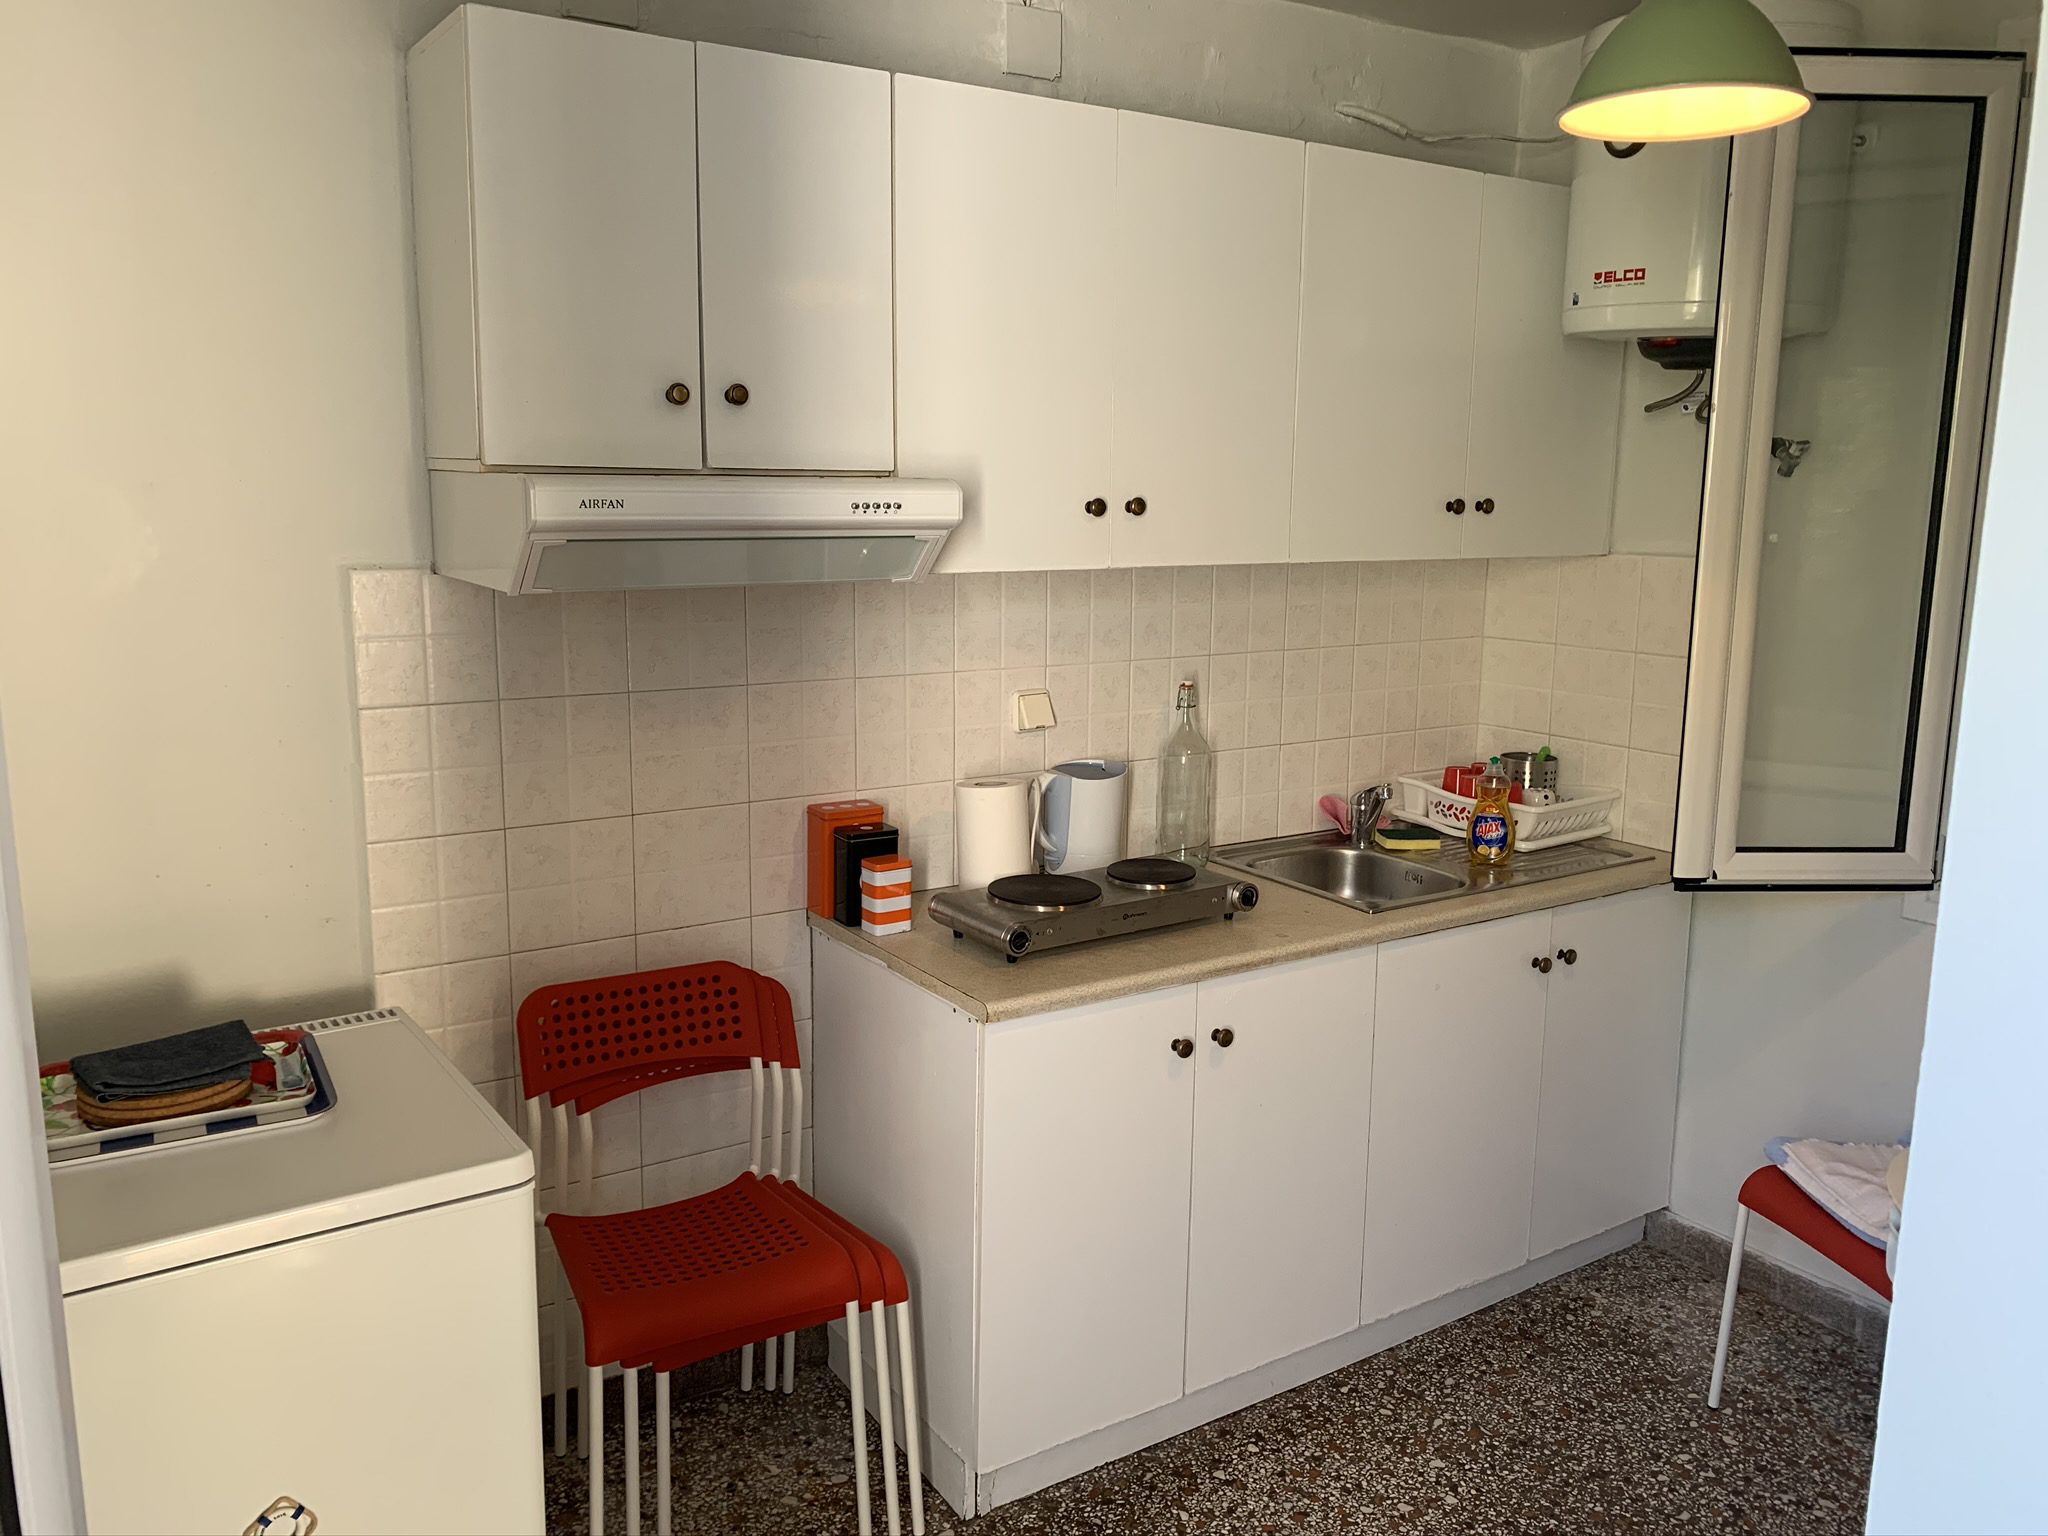 Kitchen of house for sale in Ithaca Greece, Stavros